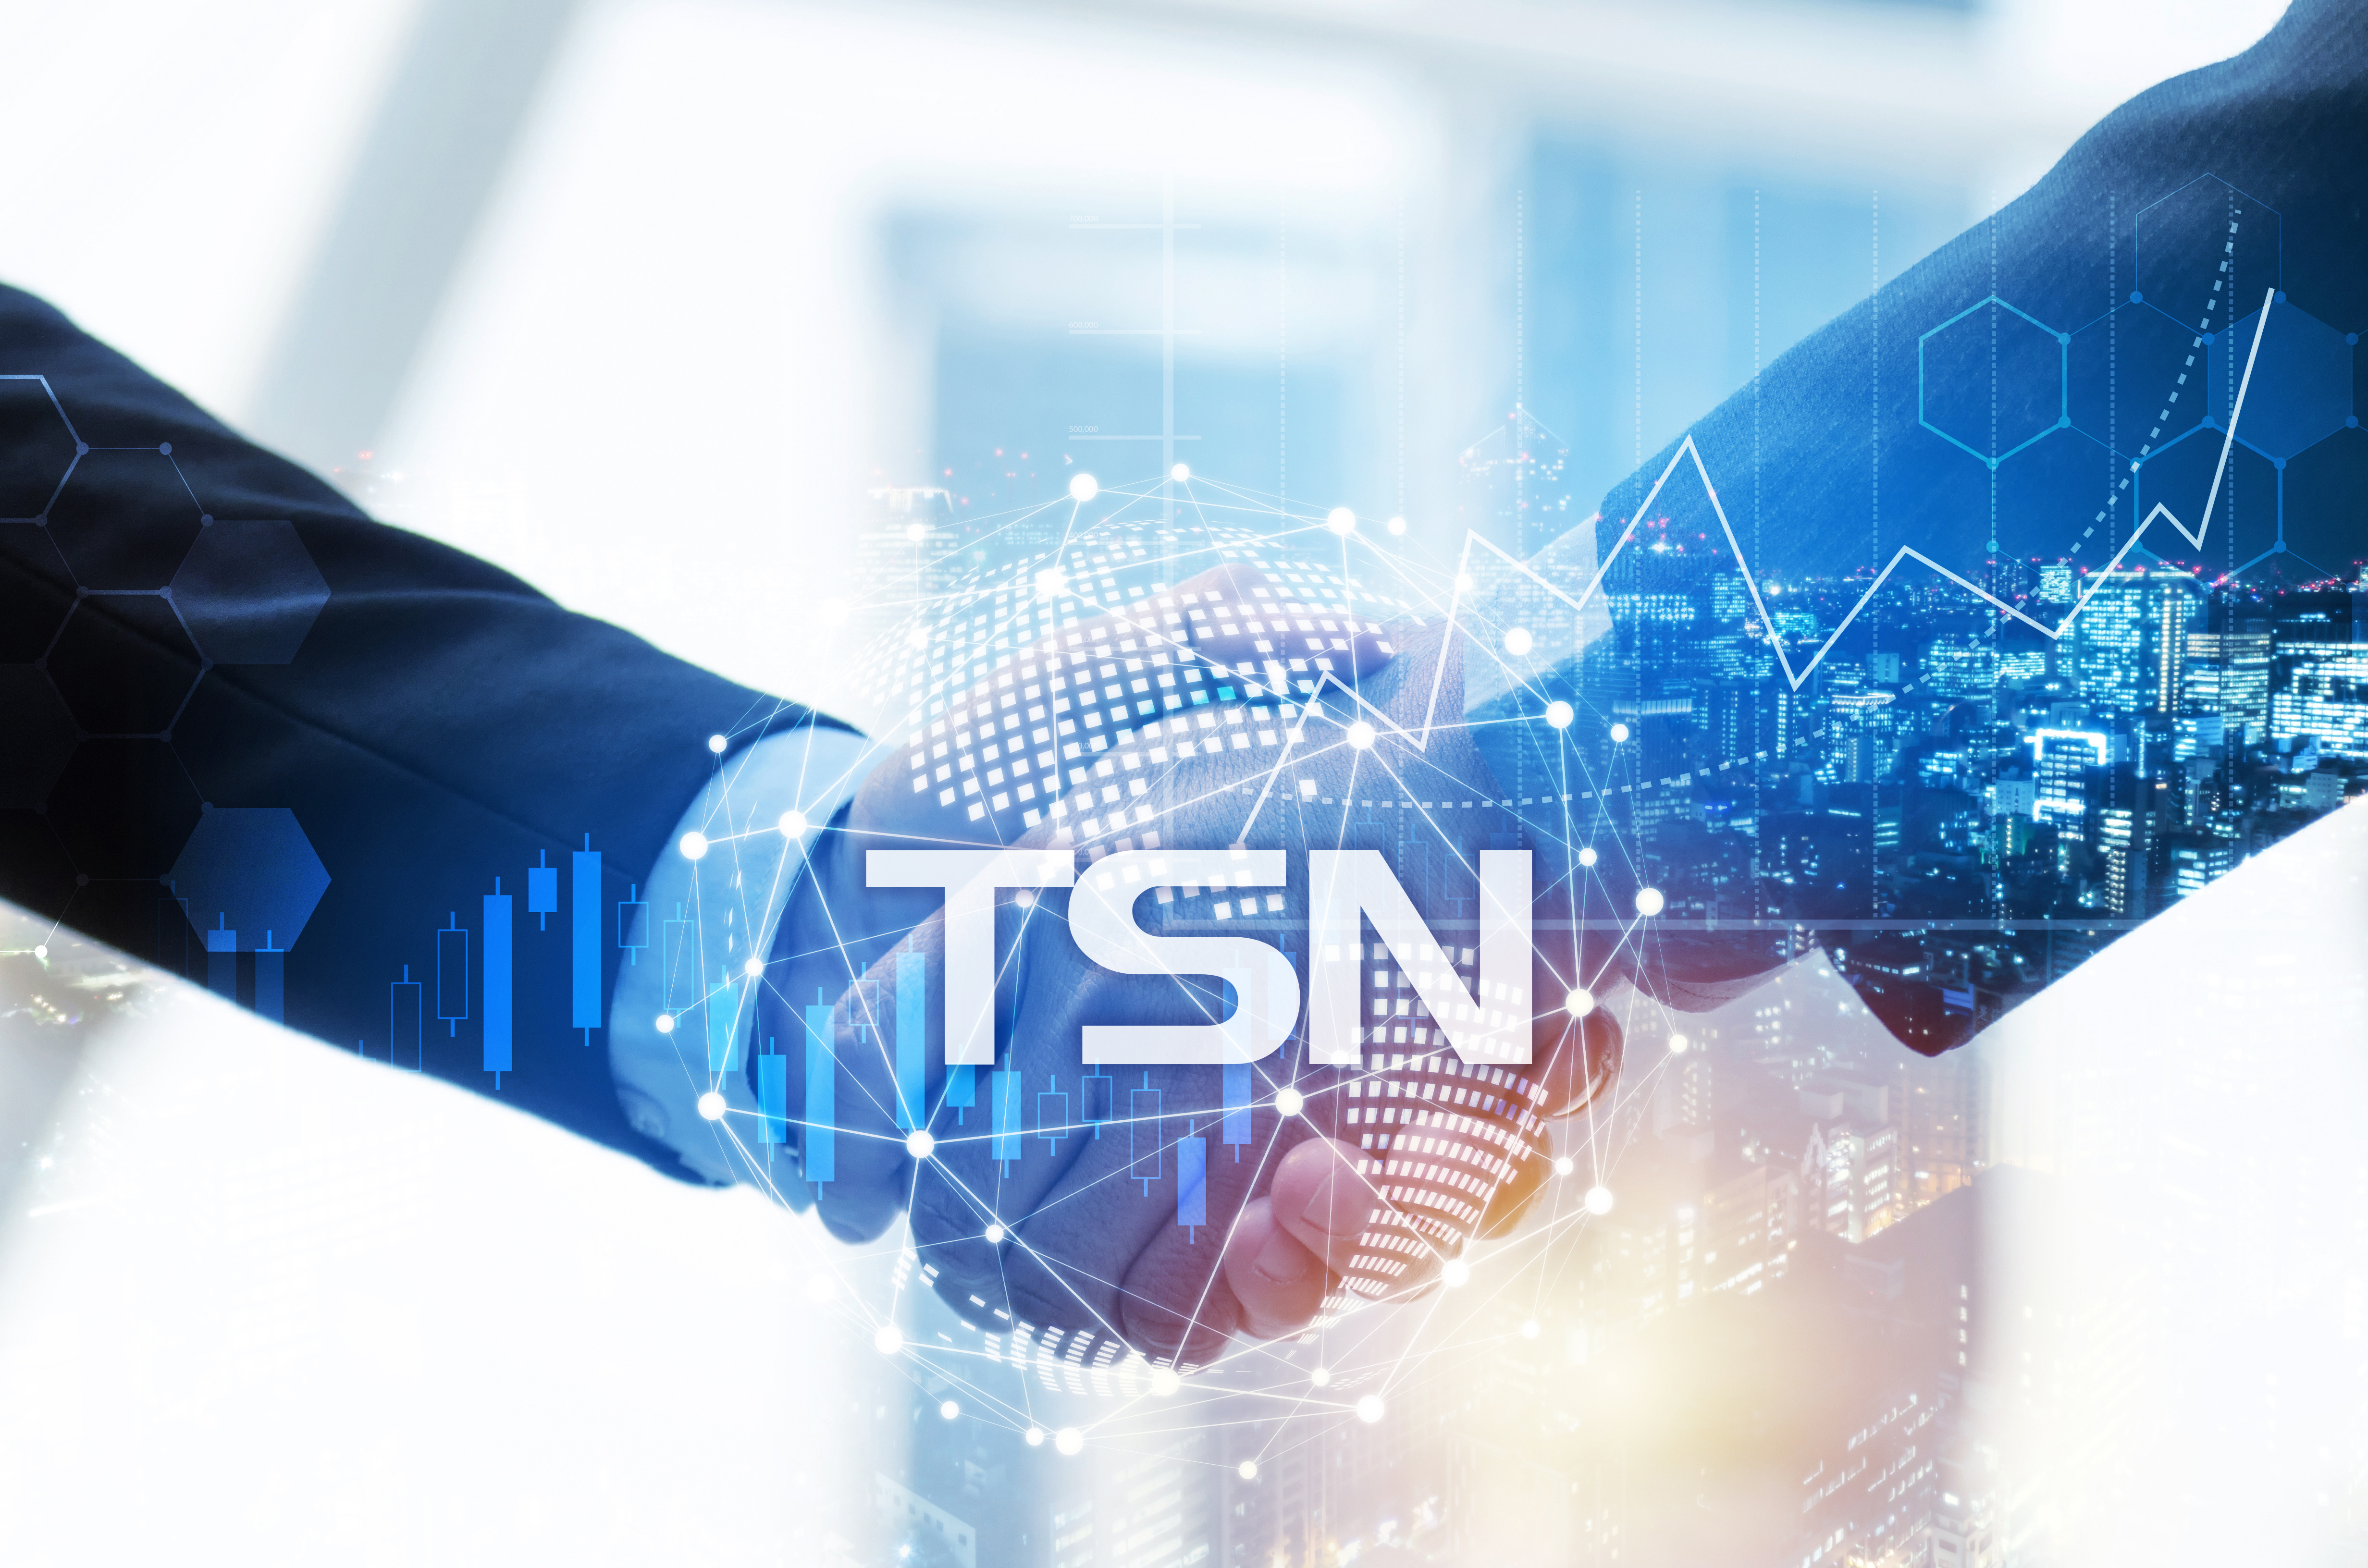 With a rapidly growing demand for Time-Sensitive Networking technology, the number of industrial automation vendors offering TSN-compatible devices continues to grow.